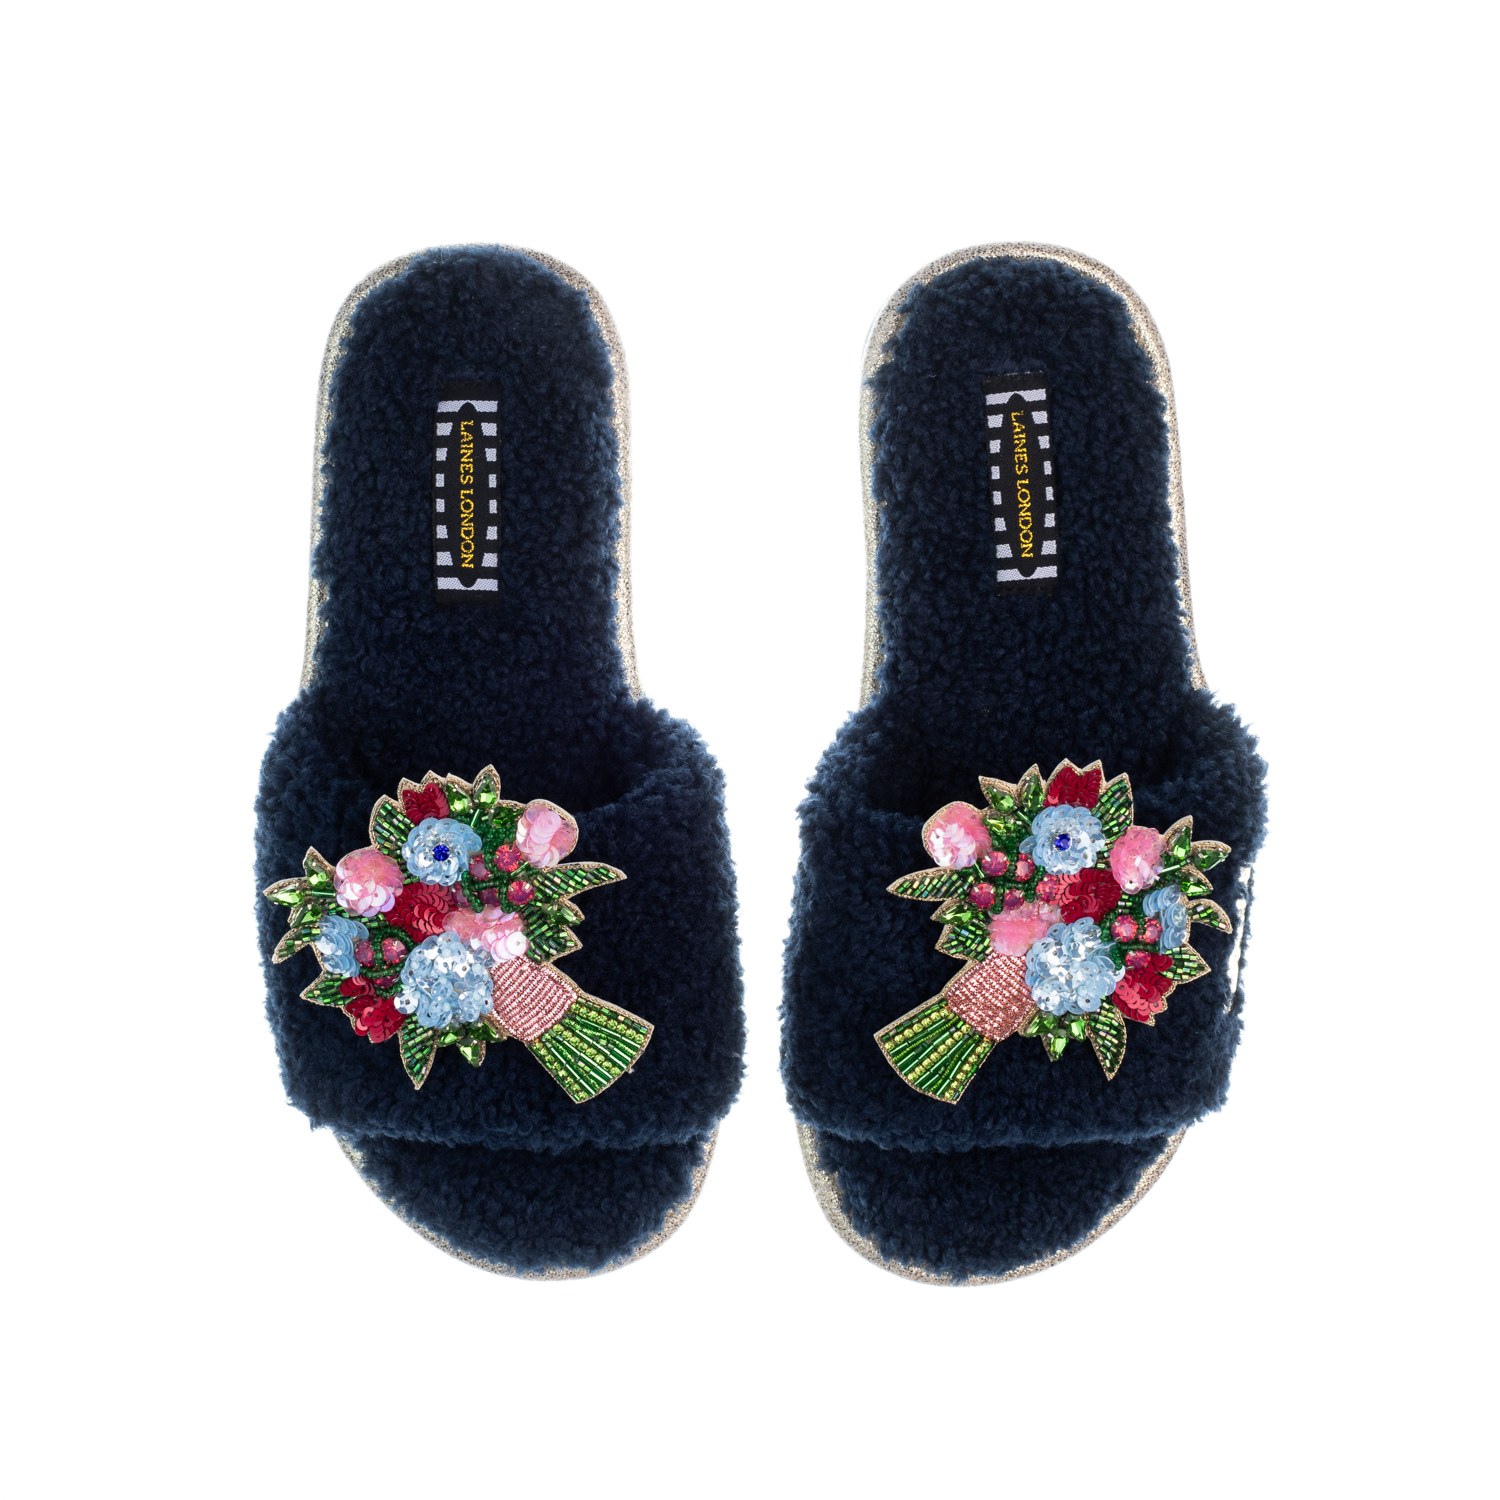 Women’s Blue Teddy Toweling Slipper Sliders With Double Flower Bouquet Brooches - Navy Small Laines London